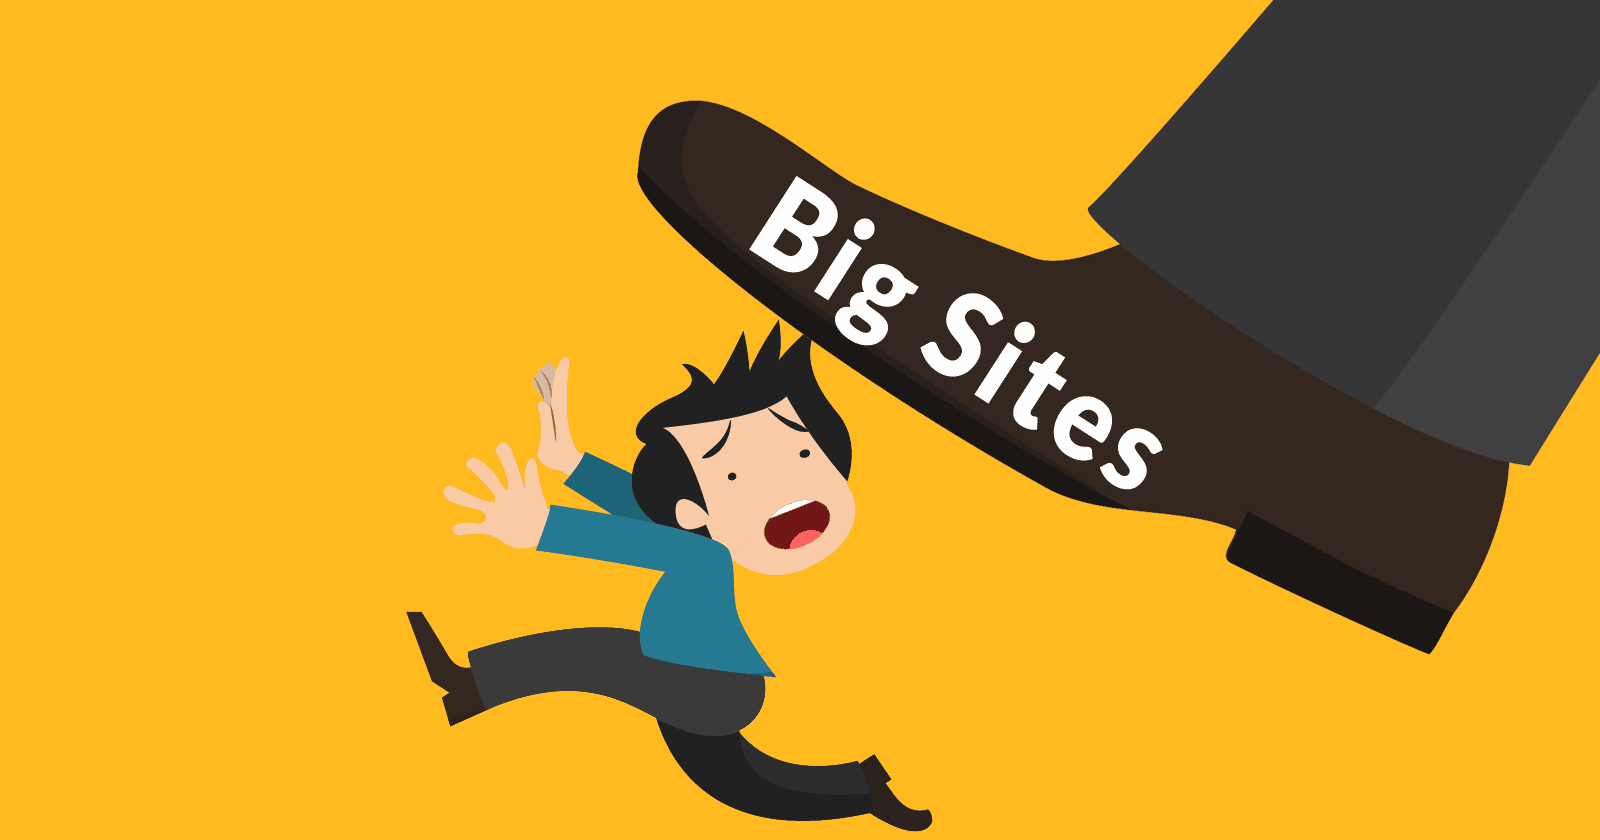 Image of a man running from a huge shoe with the words Big Sites written on it. Shoe is about to step on man